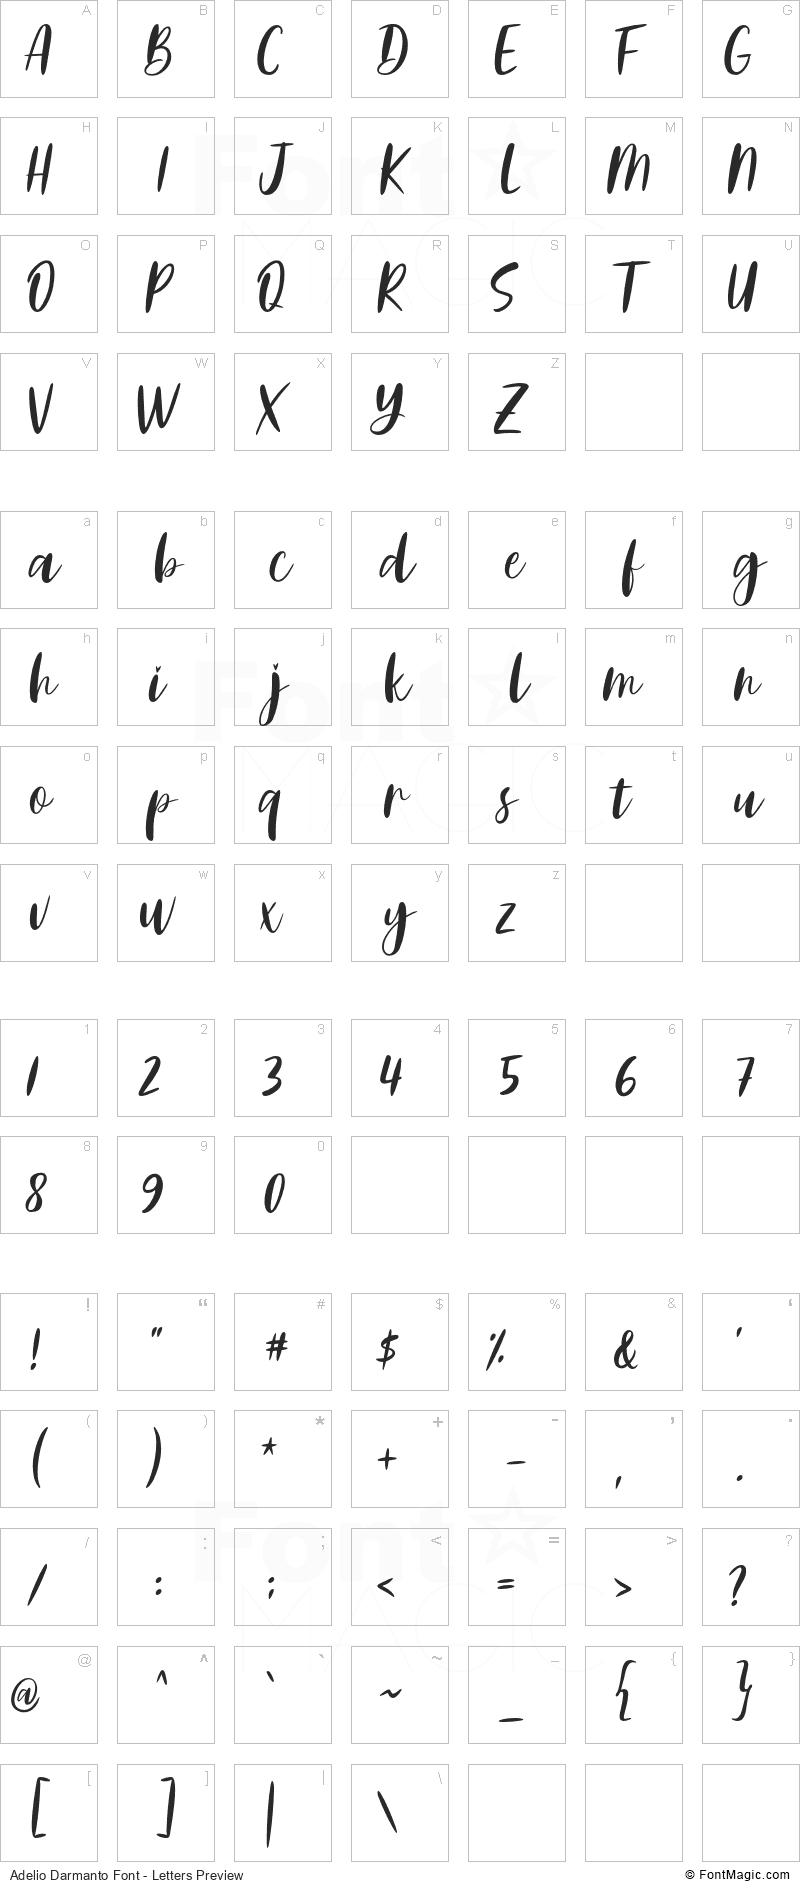 Adelio Darmanto Font - All Latters Preview Chart